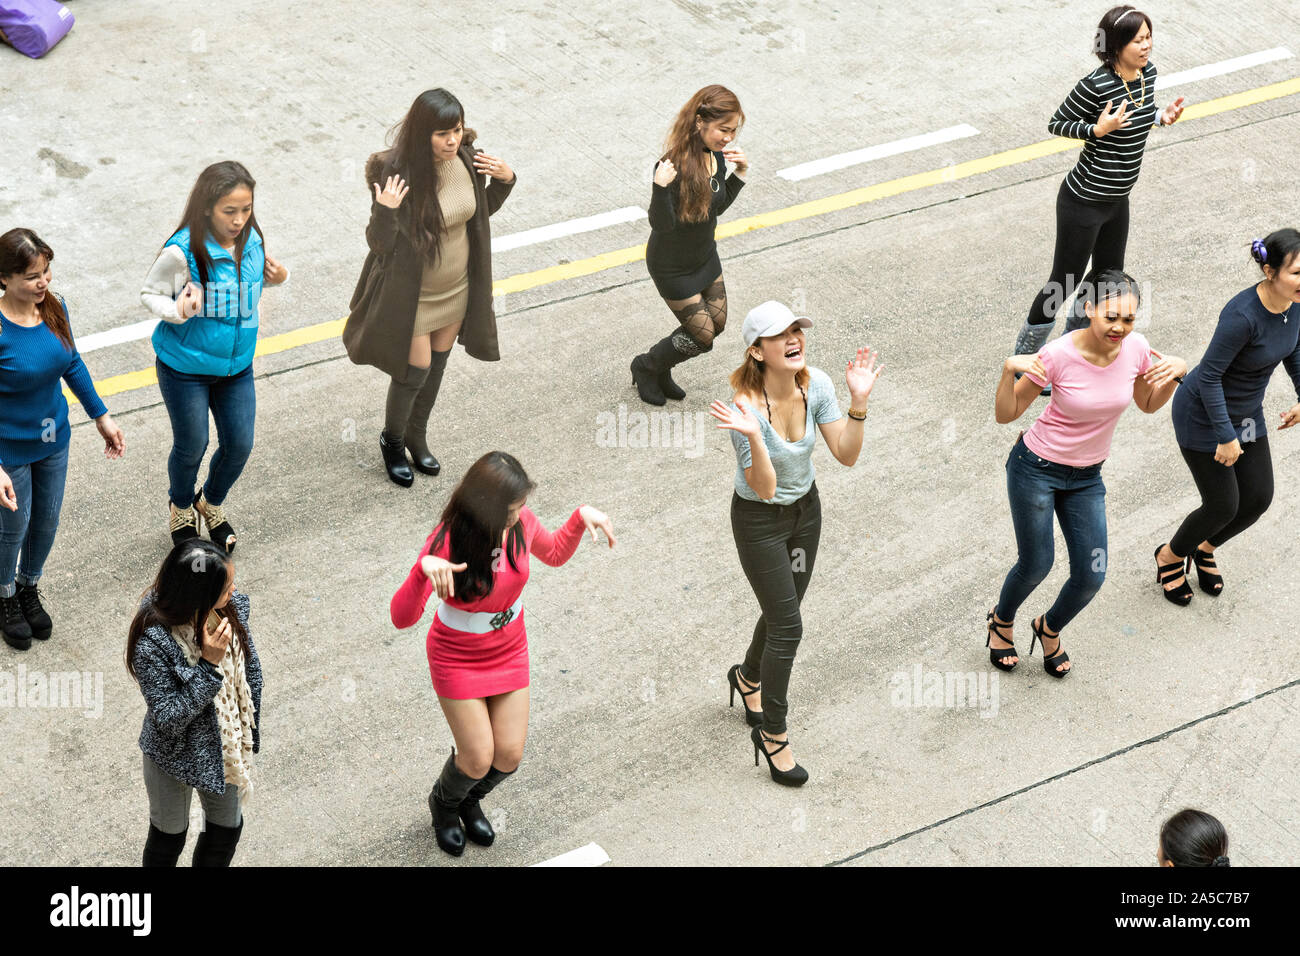 Filipino domestic workers gather on their day-off and hold an impromptu line dance in Central District, Hong Kong. Approximately 130,000 Filipino domestic servants work in Hong Kong and all have Sundays off. Stock Photo